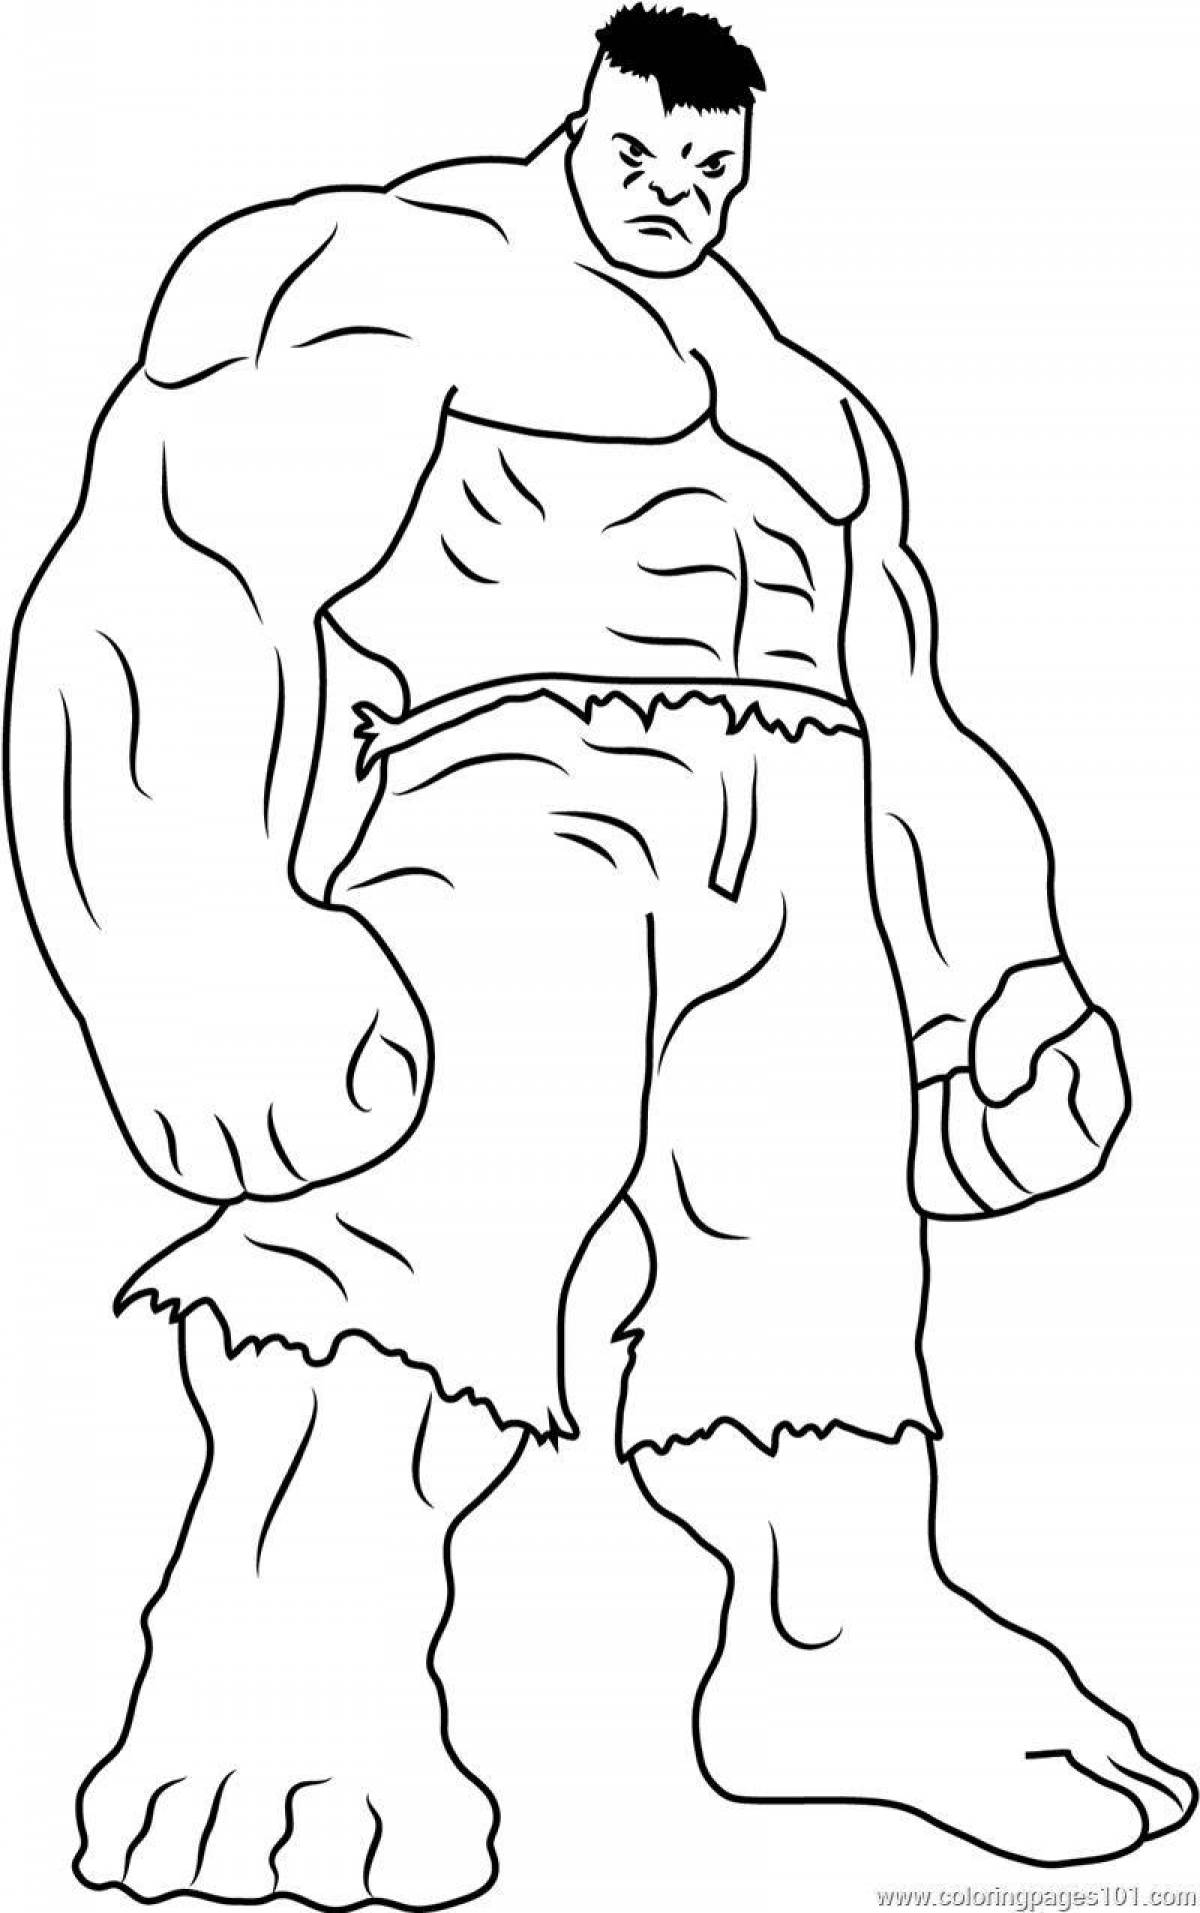 Outstanding hulk coloring book for 5-6 year olds